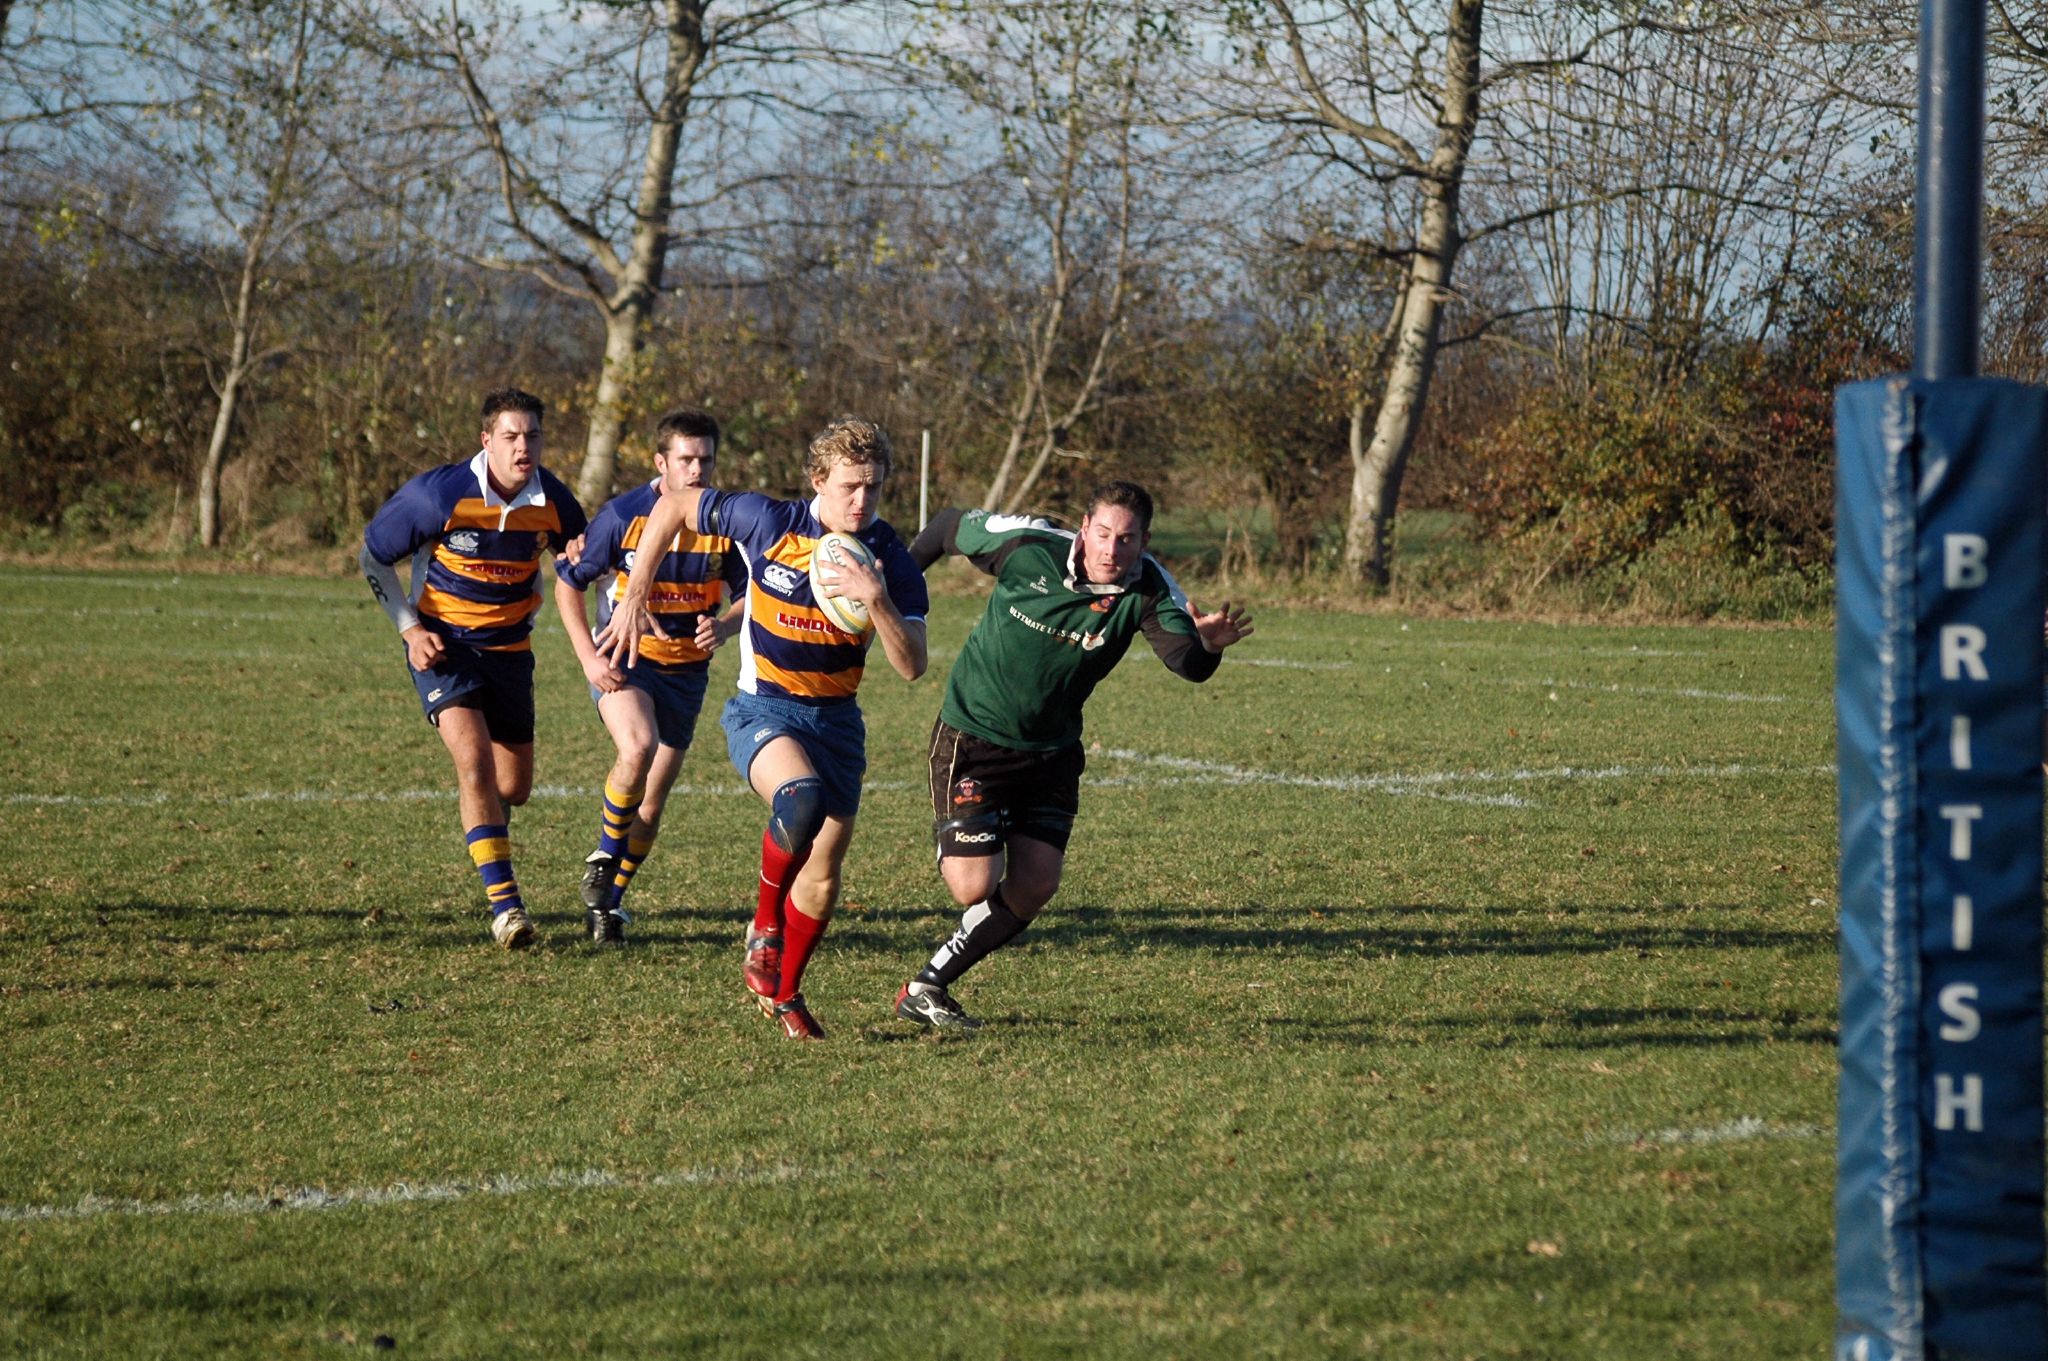 a team of young men play rugby in the field